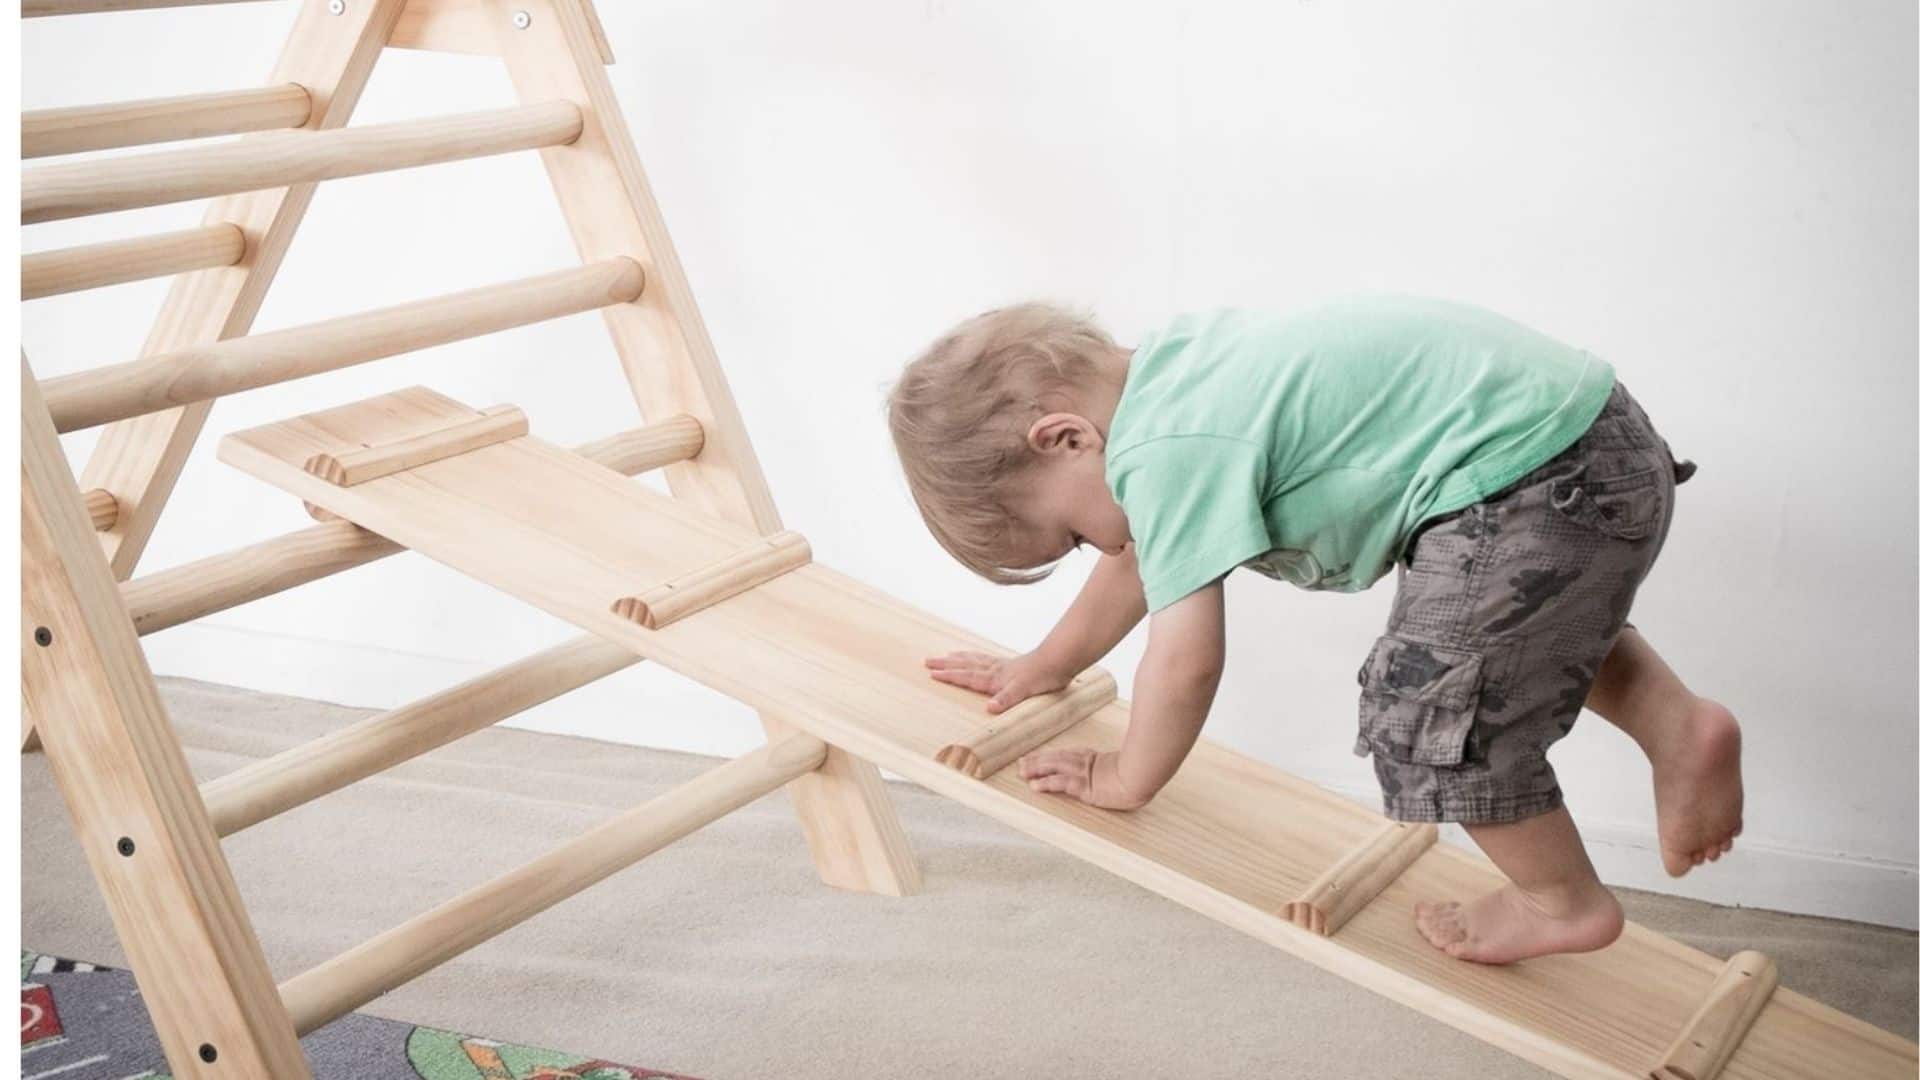 A small child climbs up a ramp leading to a pikler triangle.